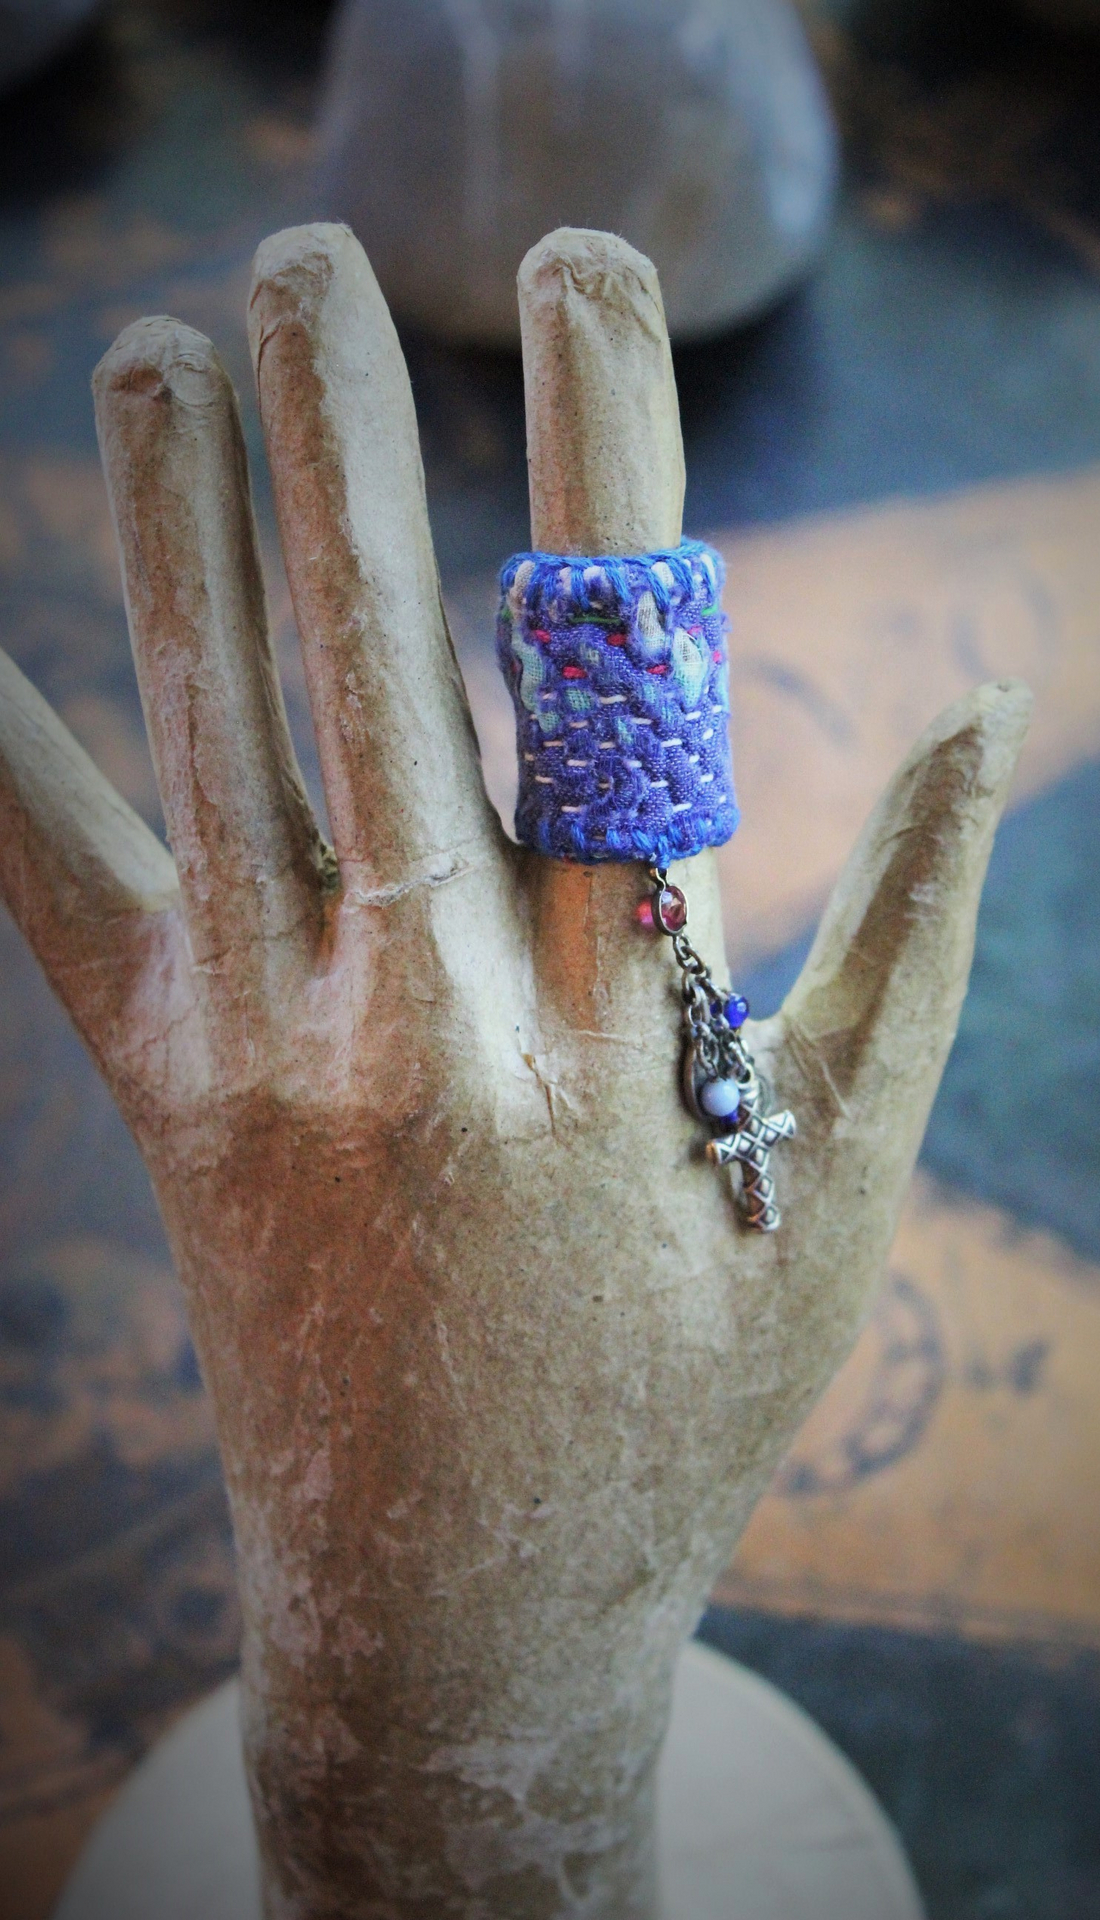 Antique Hand Stitched Kantha Ring w/Tiny Antique Sterling French Marian Medal,Antiqe Sterling Cross,Antique Our Lady of Lourdes Medal,Tiny Antique Art Deco Beads